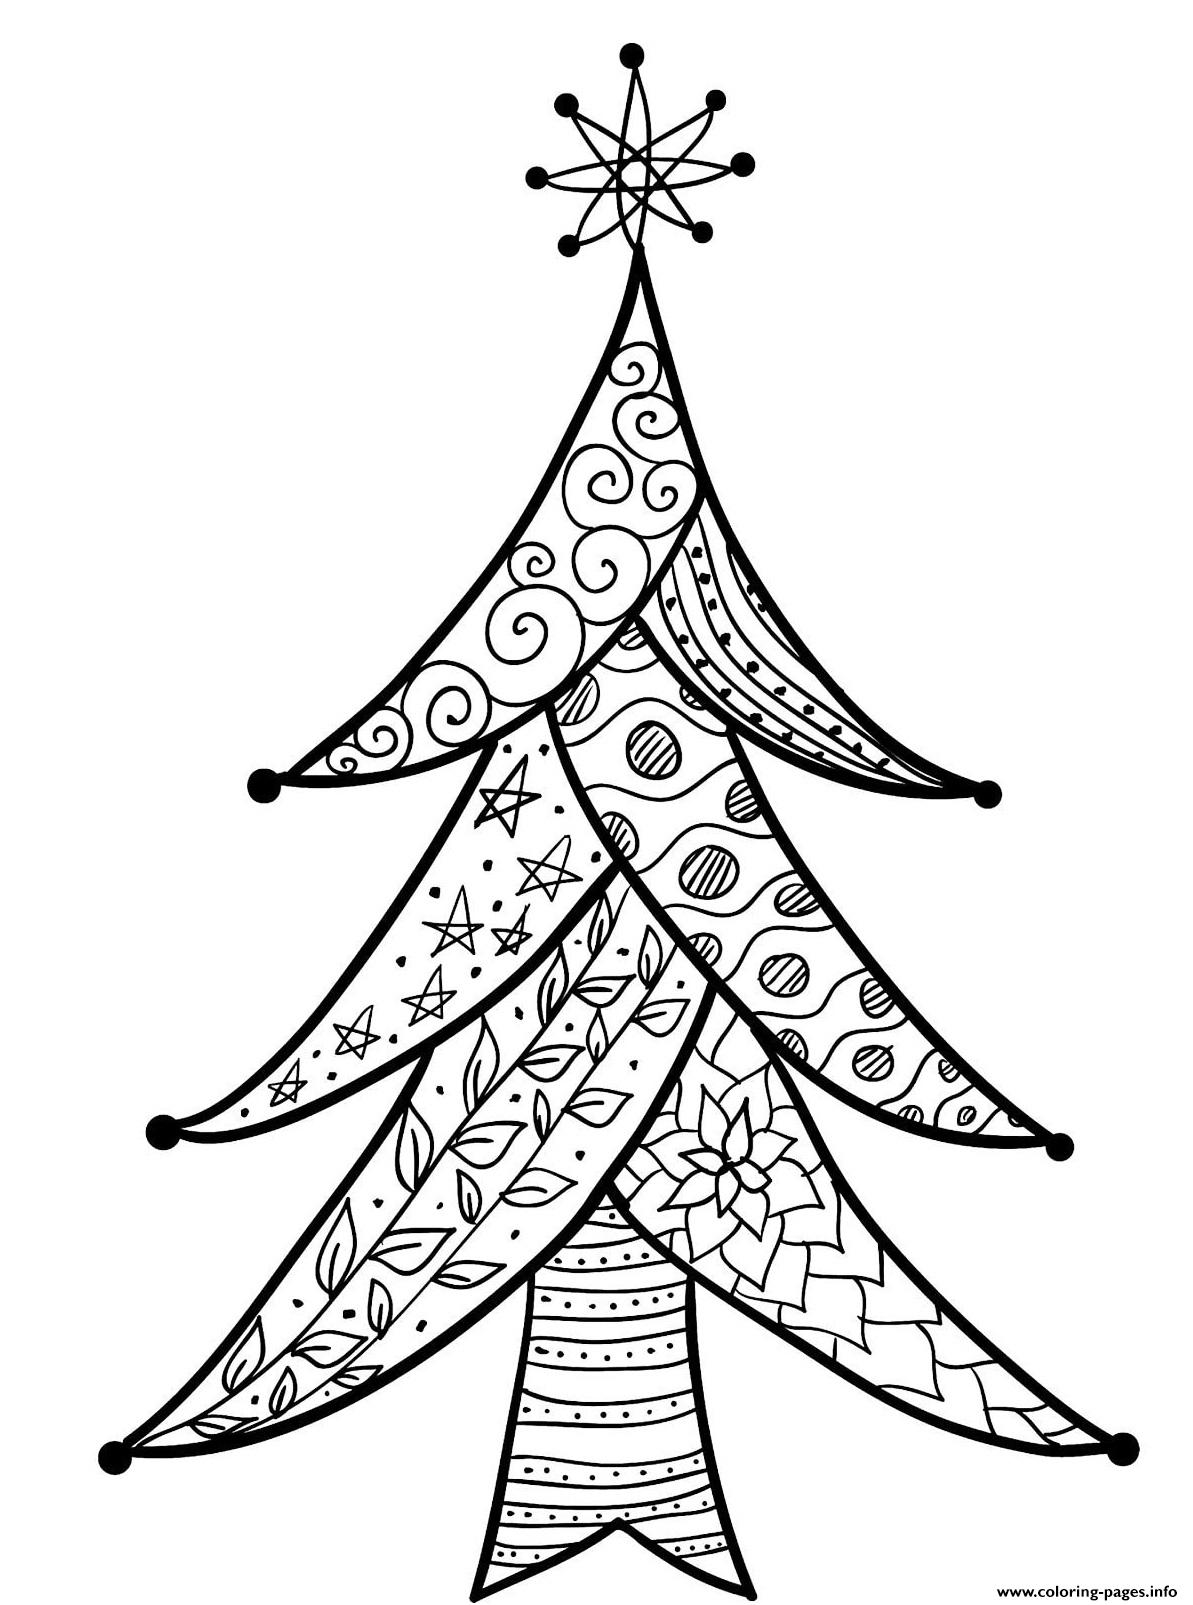 Pretty Patterns On A Christmas Tree Coloring Page Printable